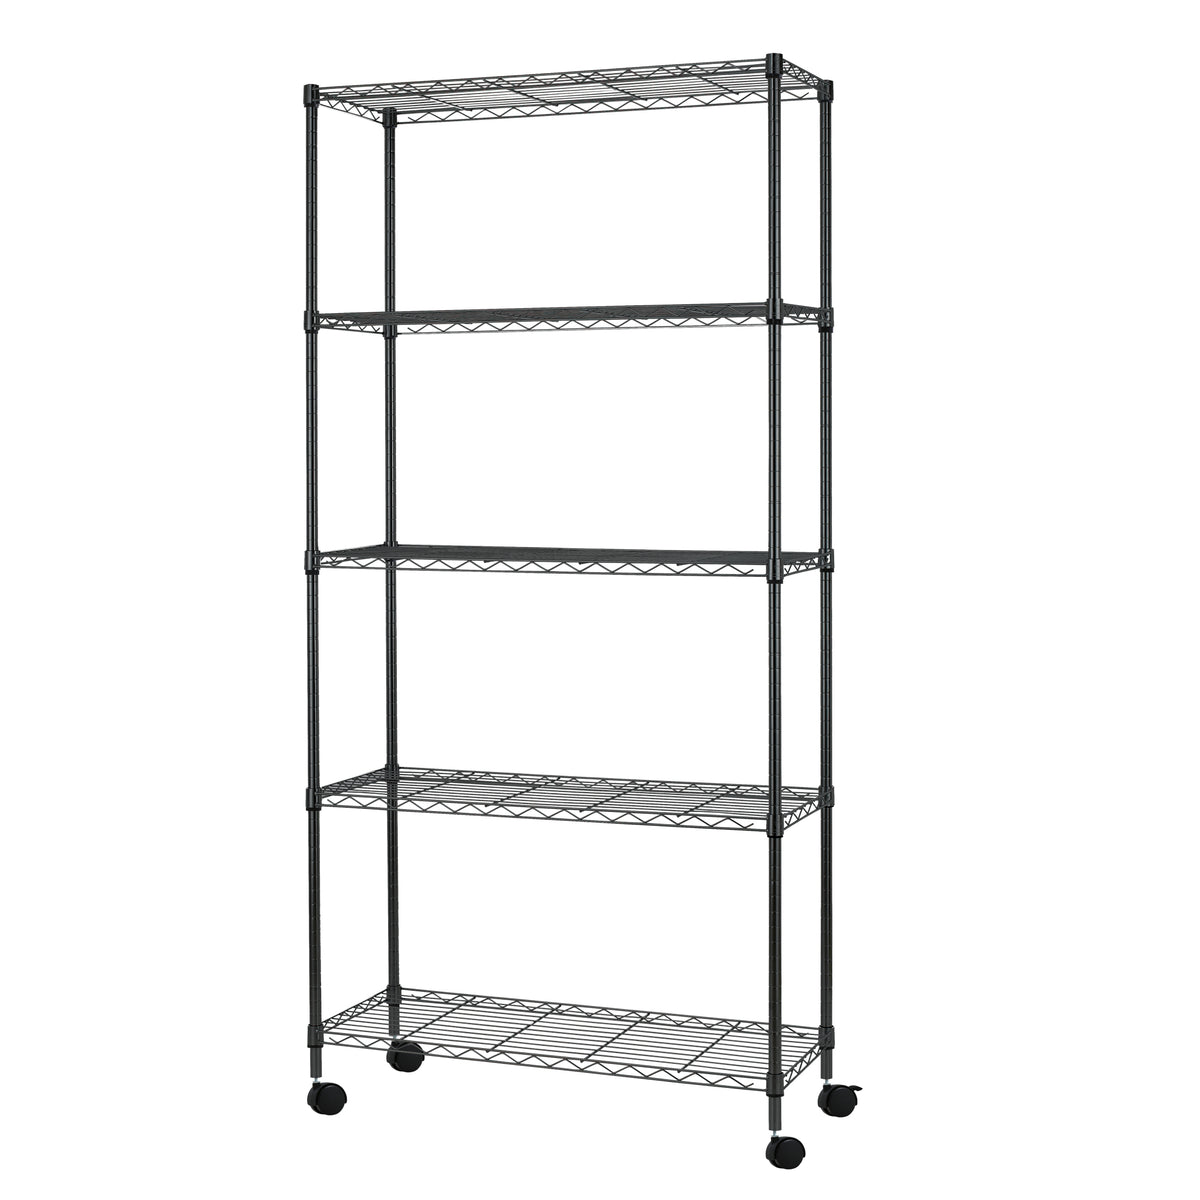 BestOffice 3-Shelf Adjustable Metal Storage Shelves Wire Shelving Unit Organizer Wire Rack 450lbs Capacity for Small places Kitchen Garage